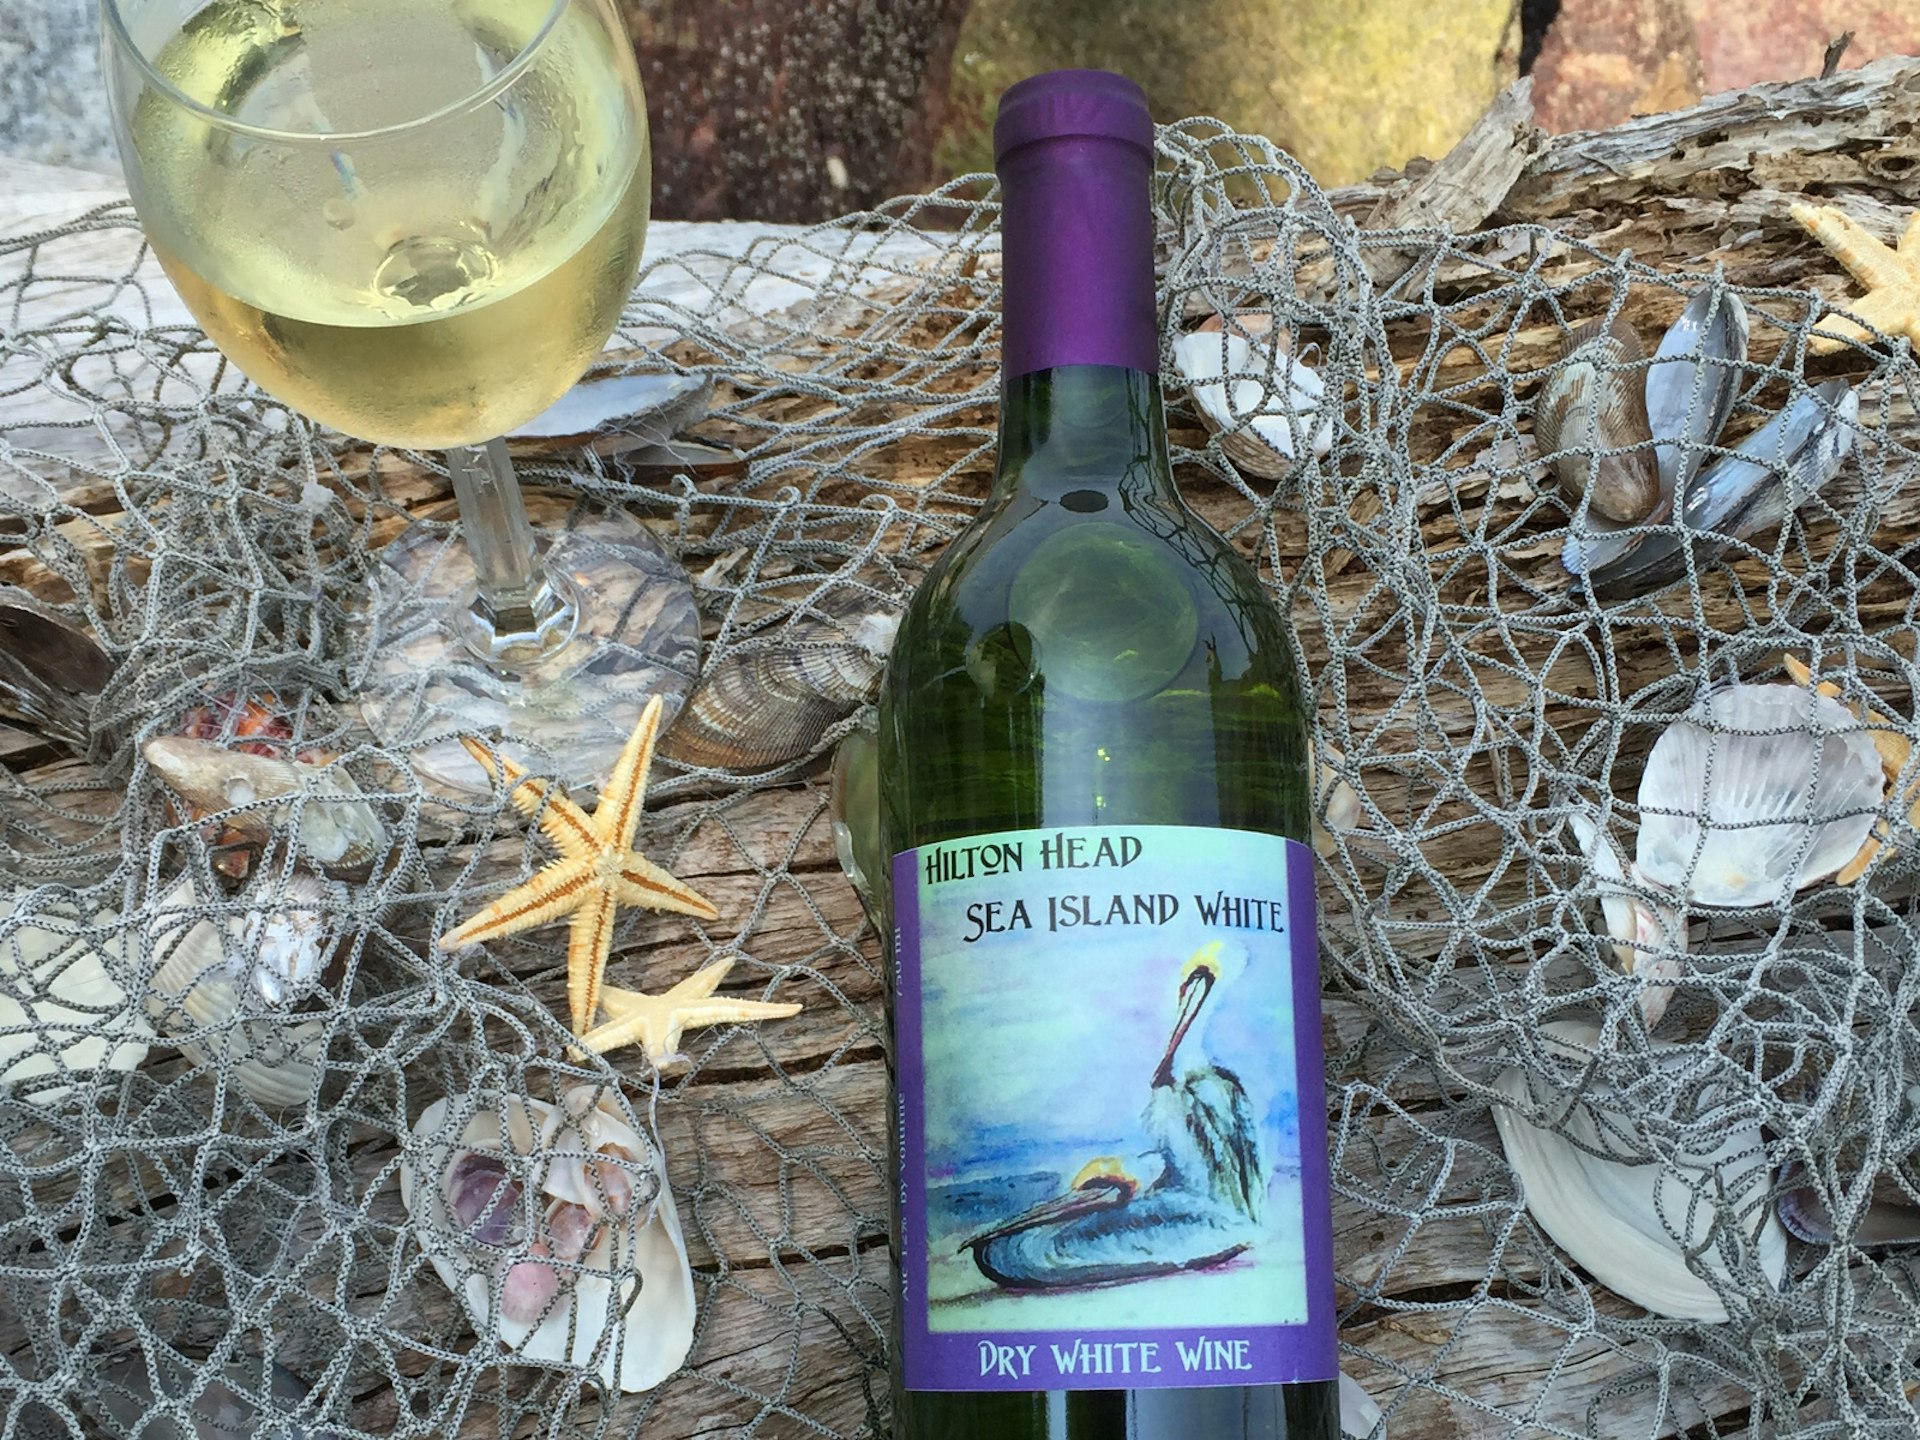 A glass of Island Winery wine and a bottle in a nest of sea shells and star fish